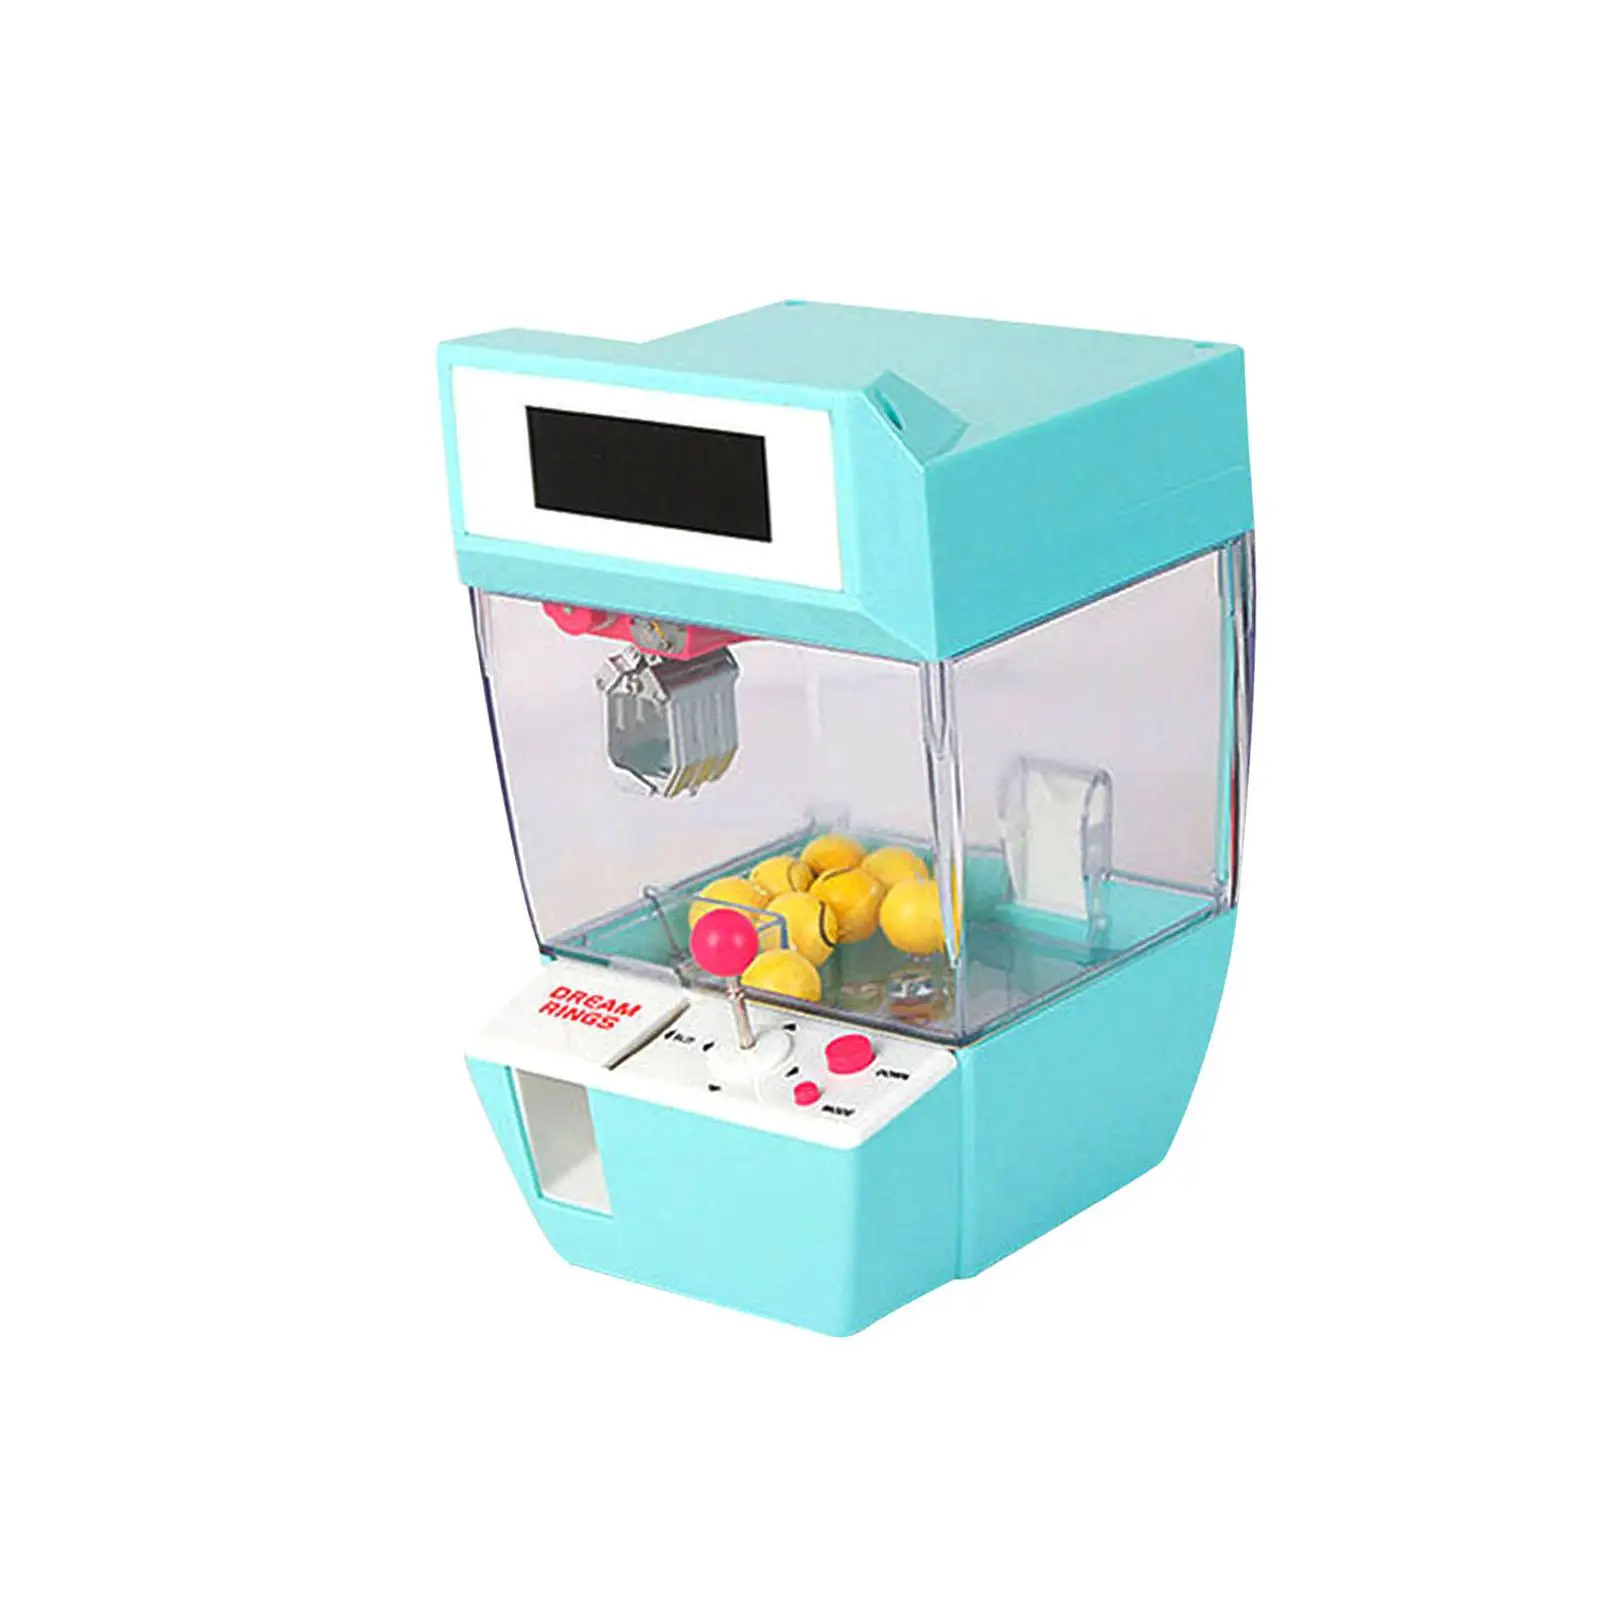 Plush Doll Toys Claw Machine Mini Toys Grabber Machine Lightweight with Light and Sounds